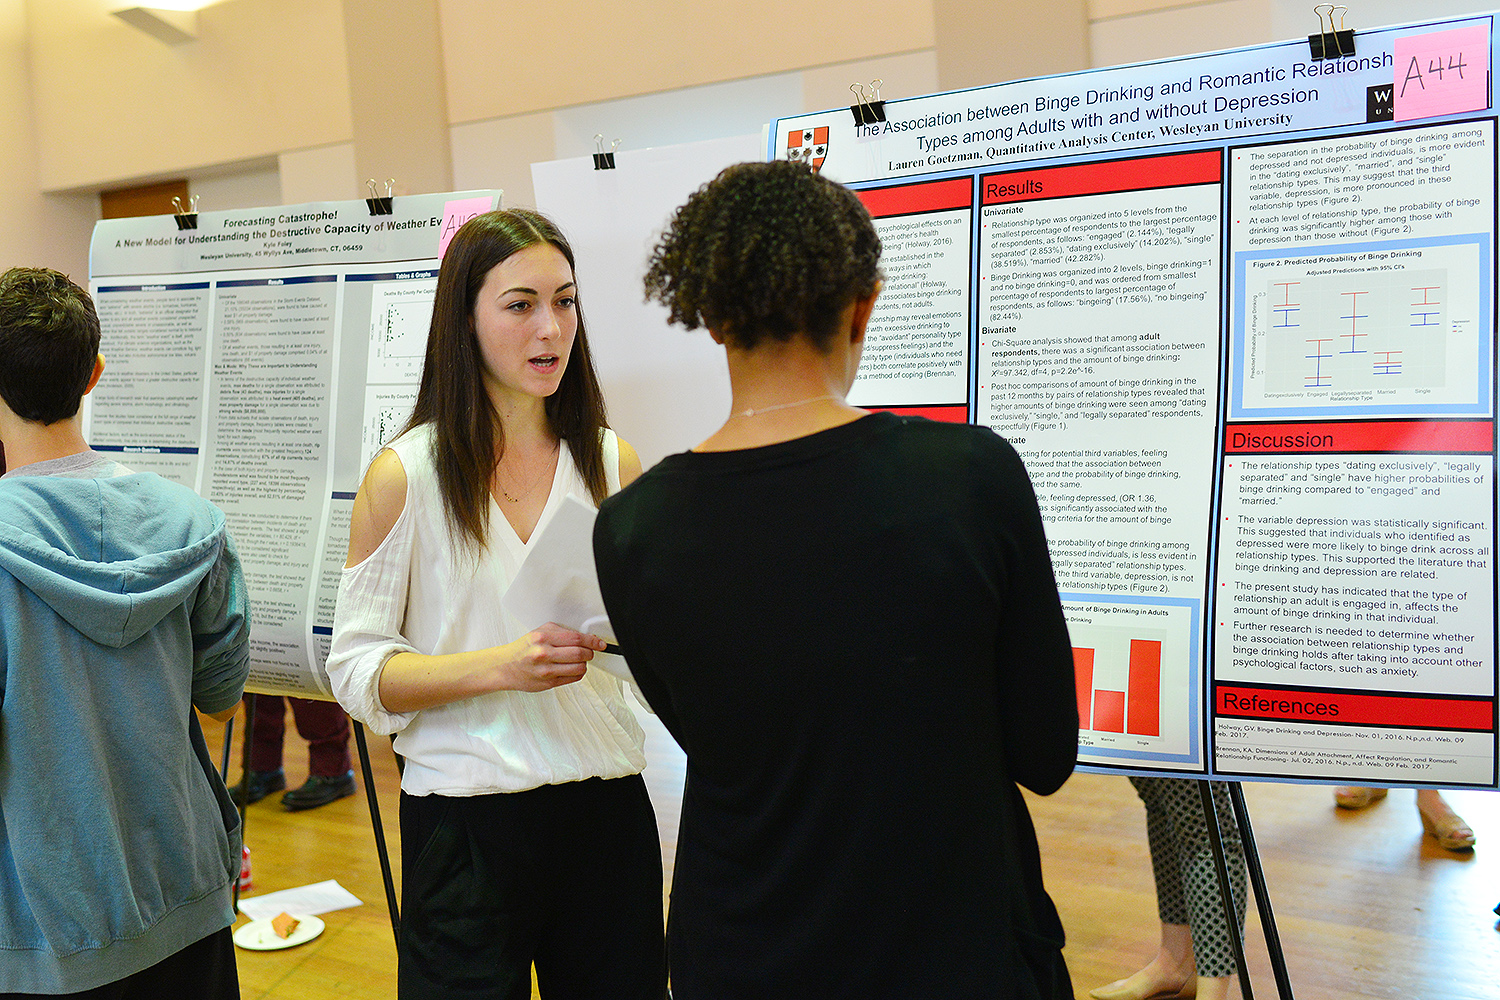  Laura Goetzman ’19 presented her research titled “The Association between Binge Drinking and Romantic Relationship Types among Adults with and without Depression.”